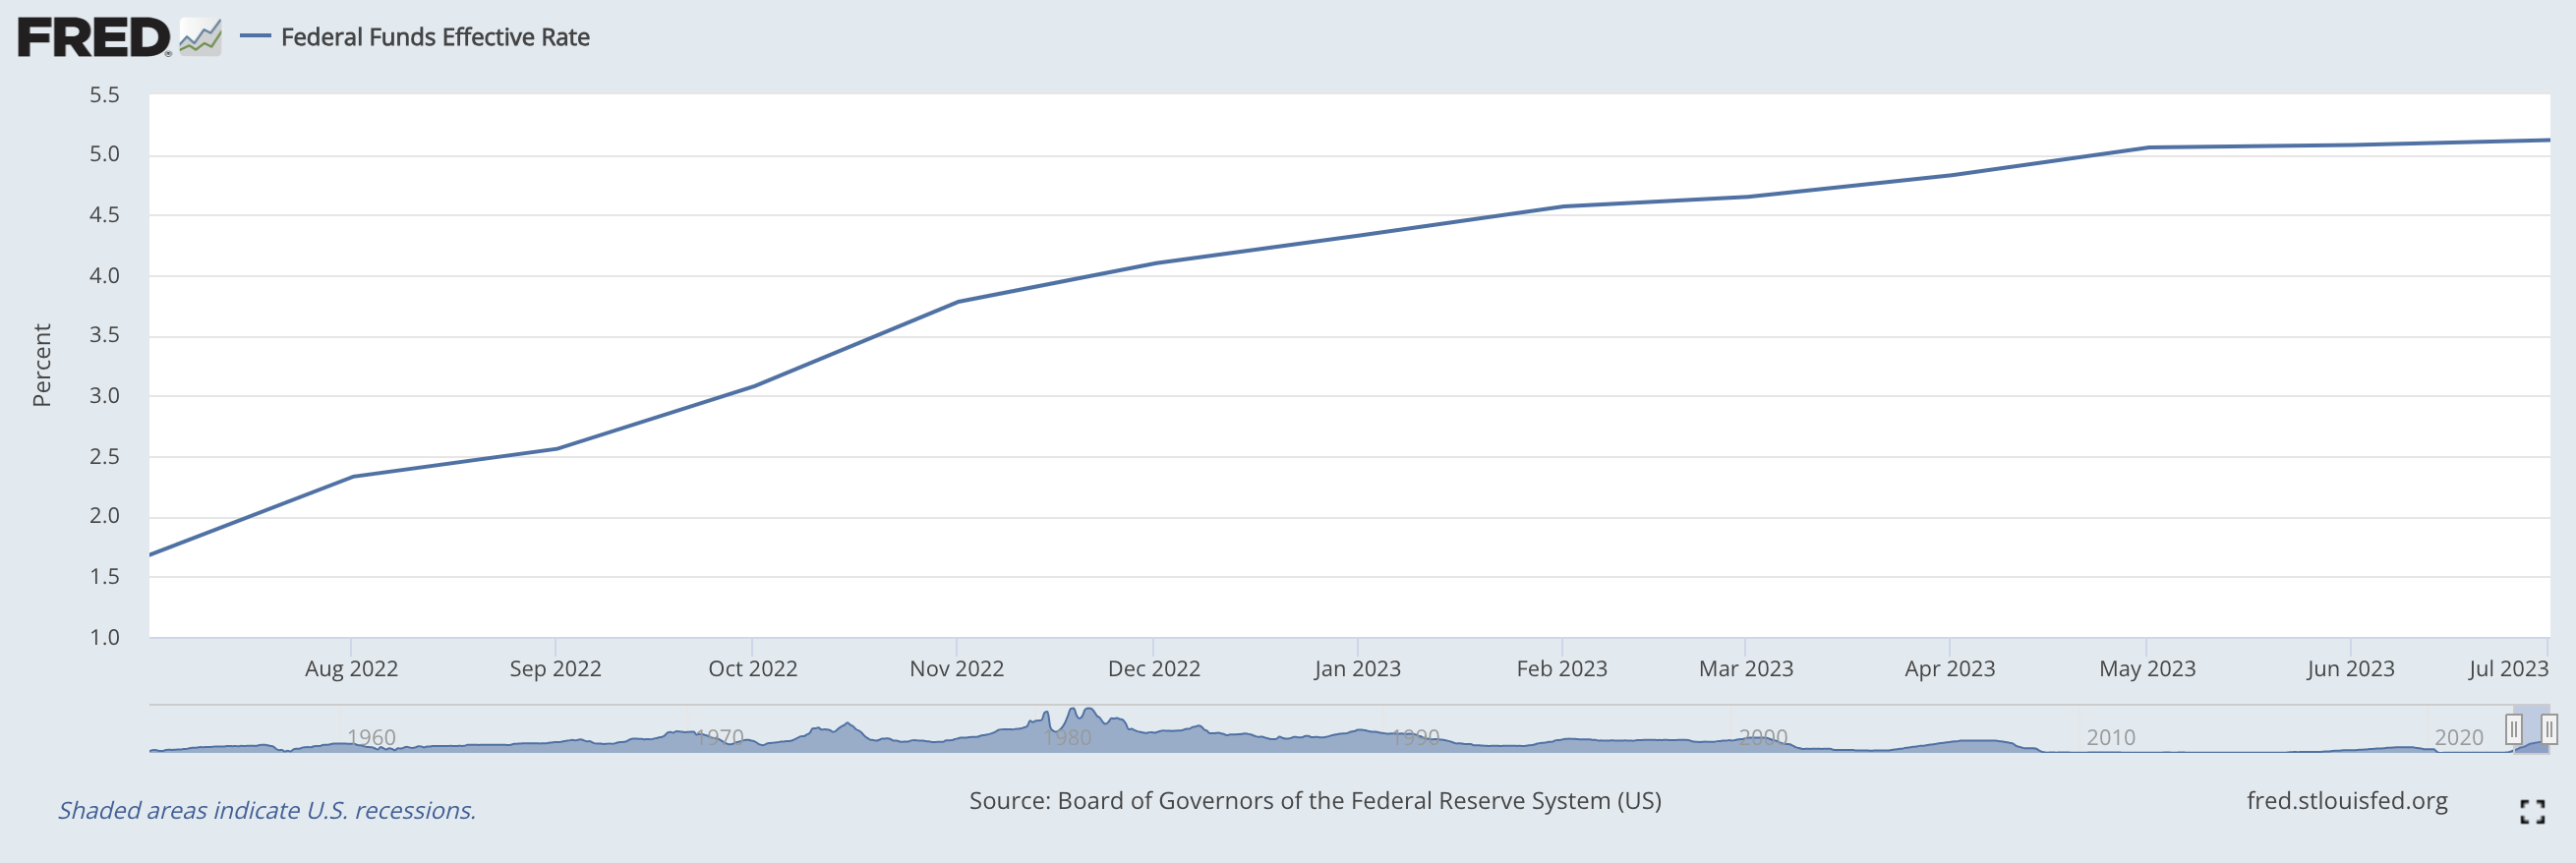 Fed interest rate hikes from July 2022 to July 2023